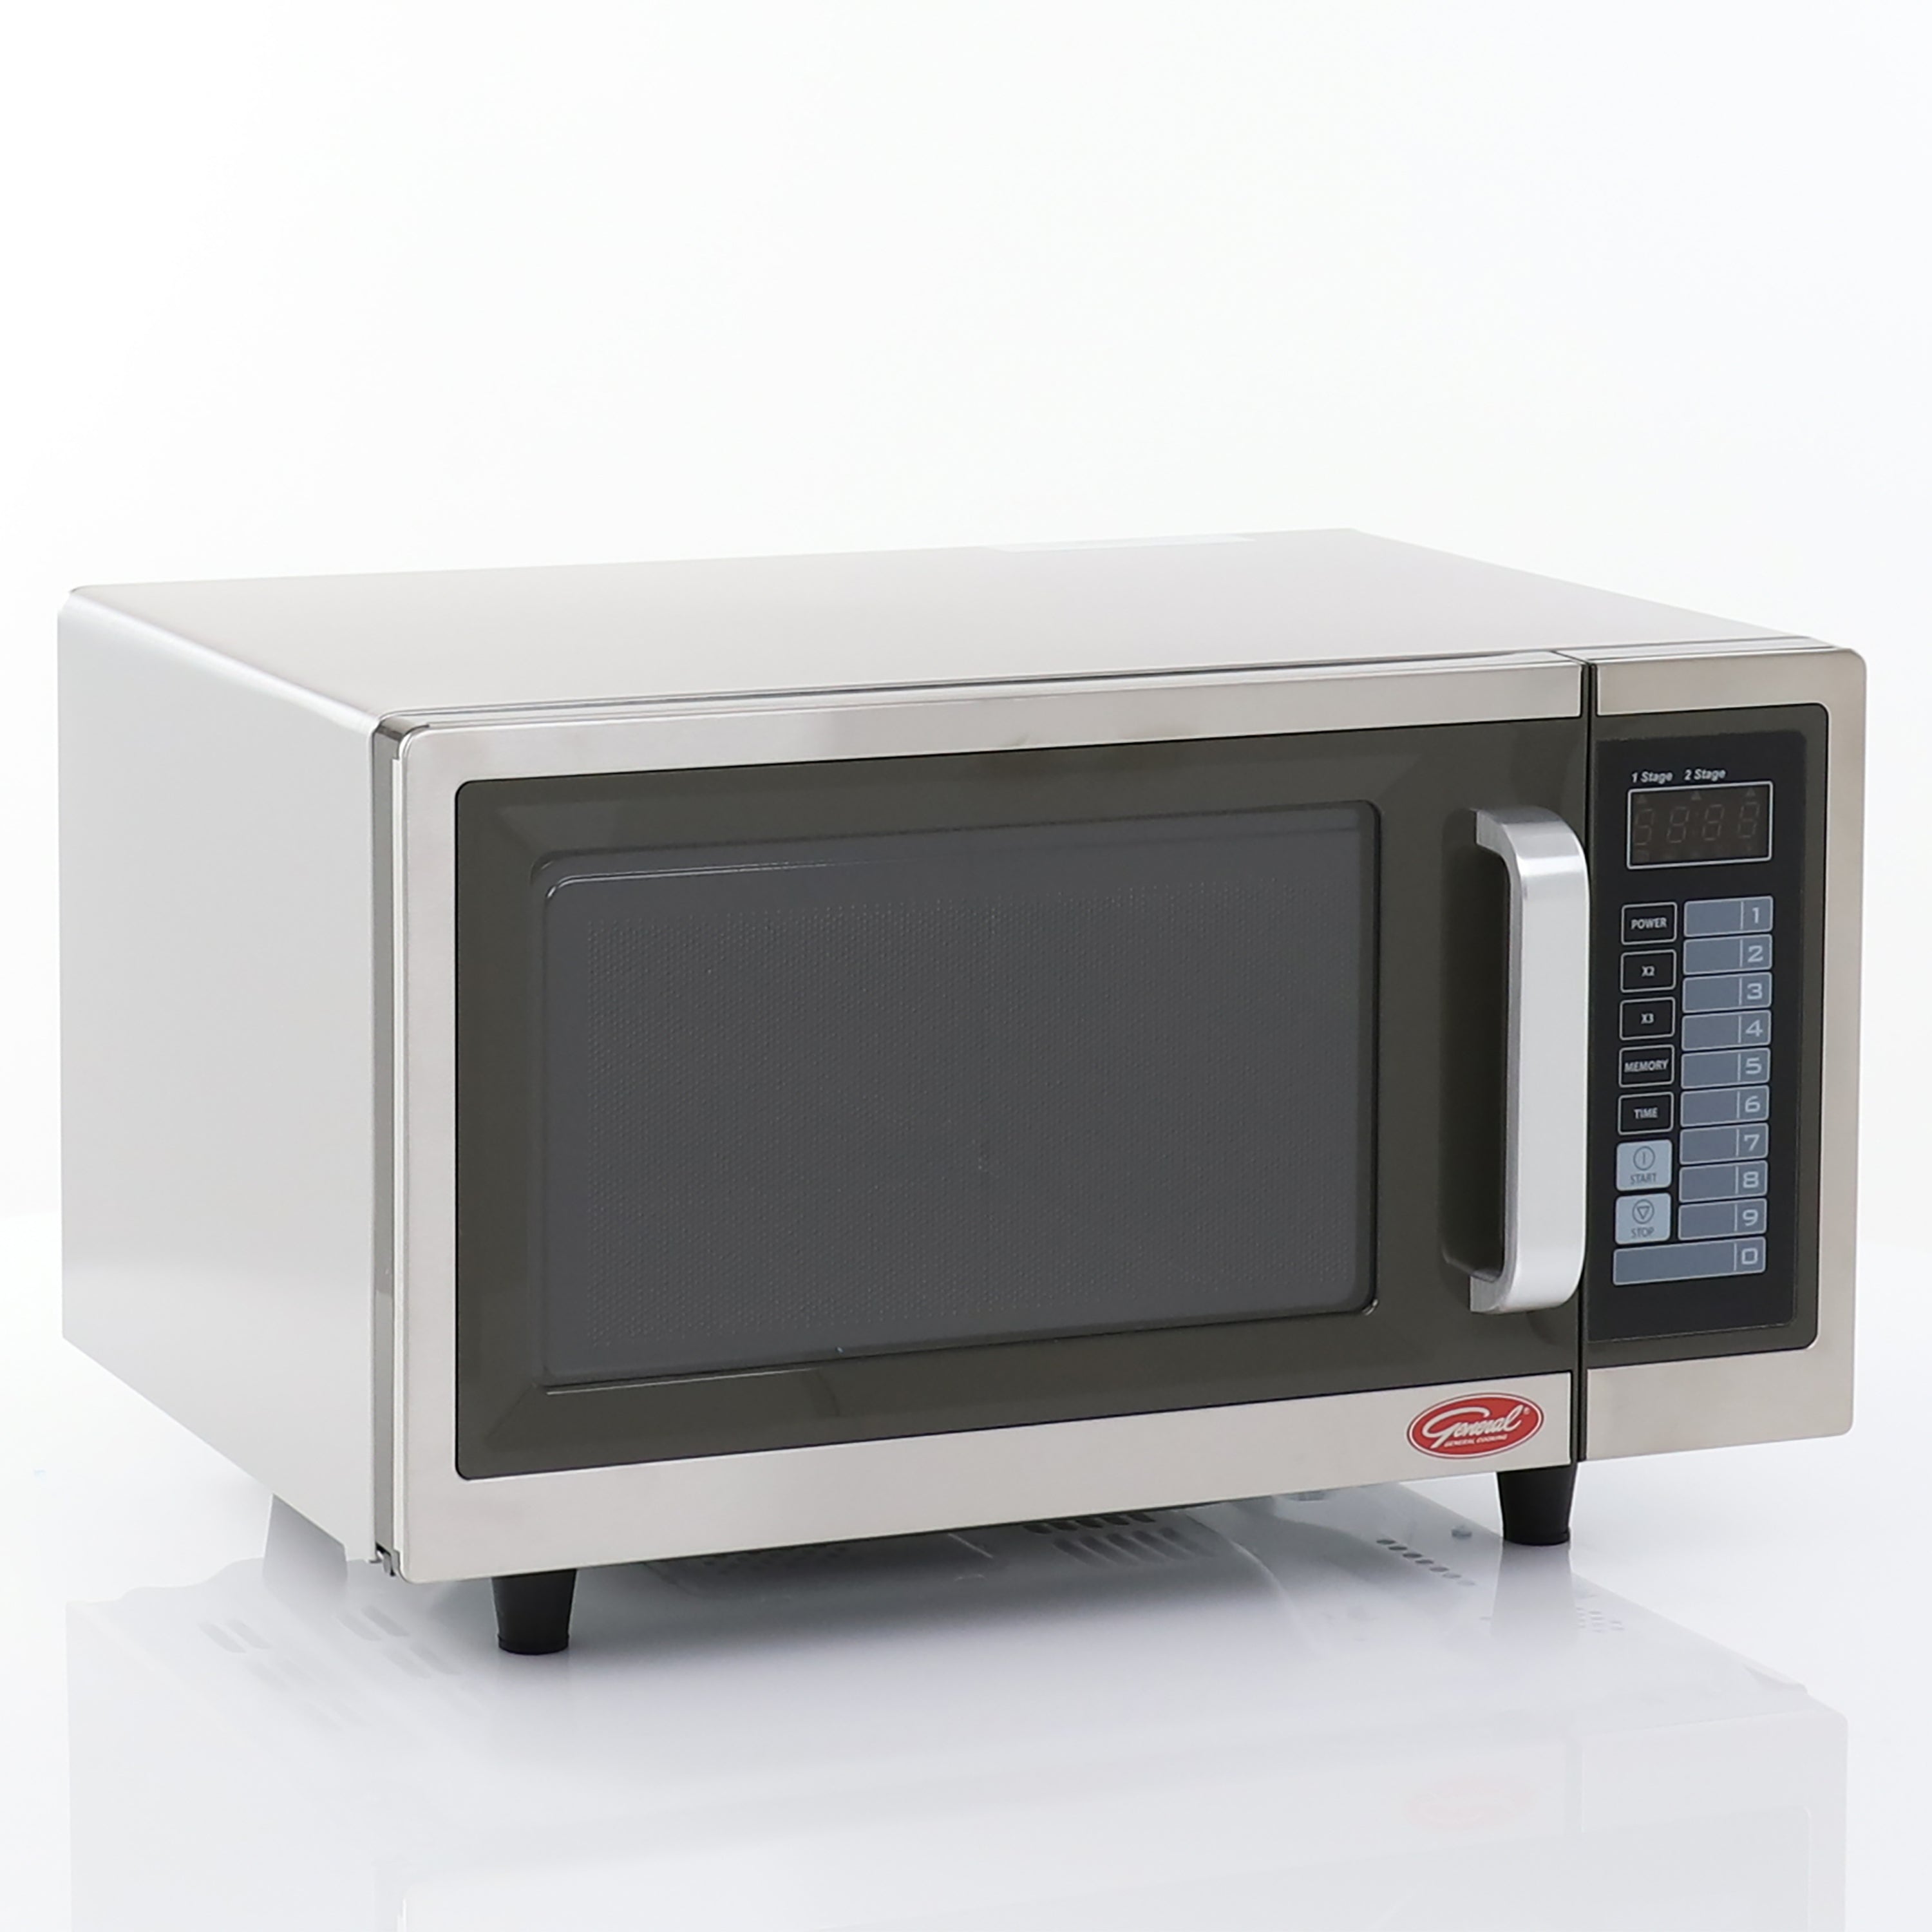 General - GEW1000E, General Foodservice Commercial Microwave with Digital Touch Pad, 120V/1,000W, in Stainless Steel